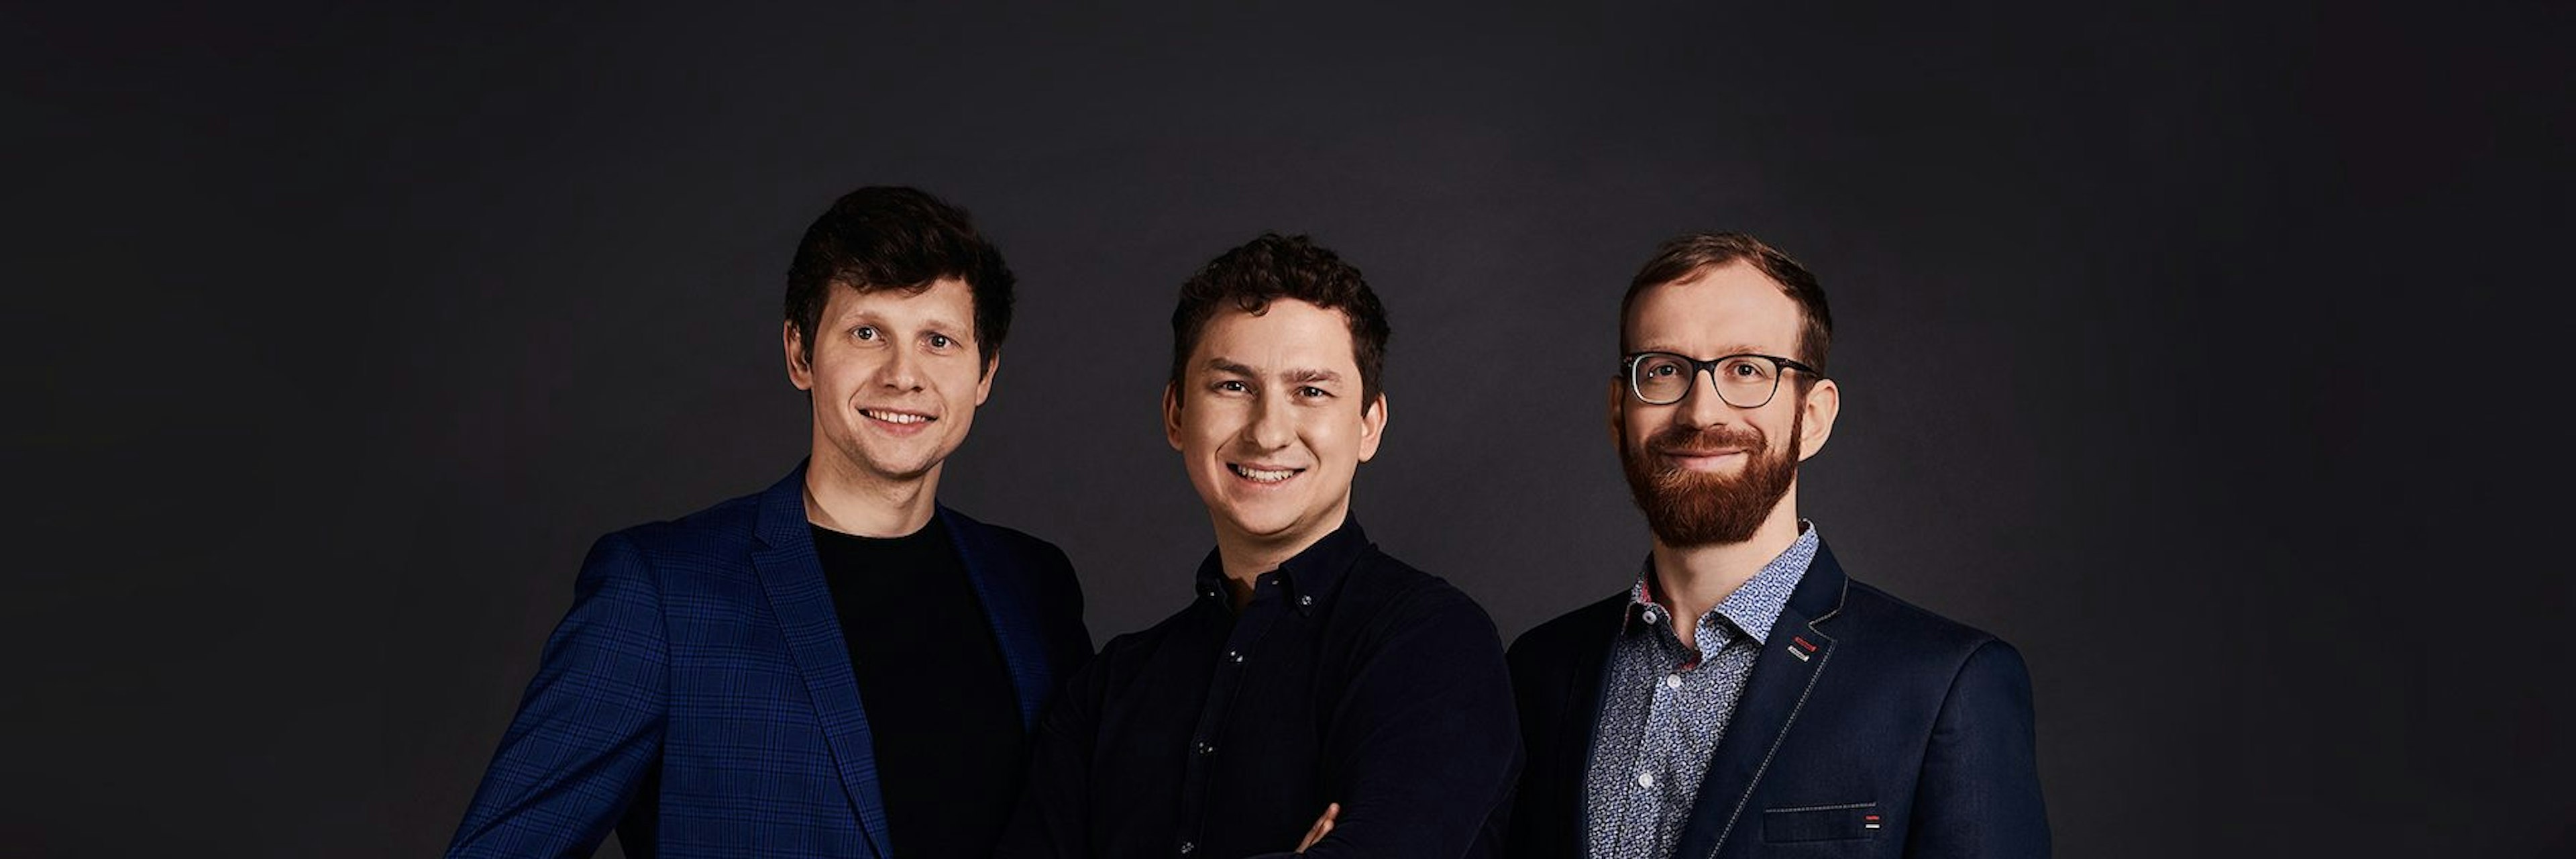 The three male founders of Plenti standing in a row on a dark background